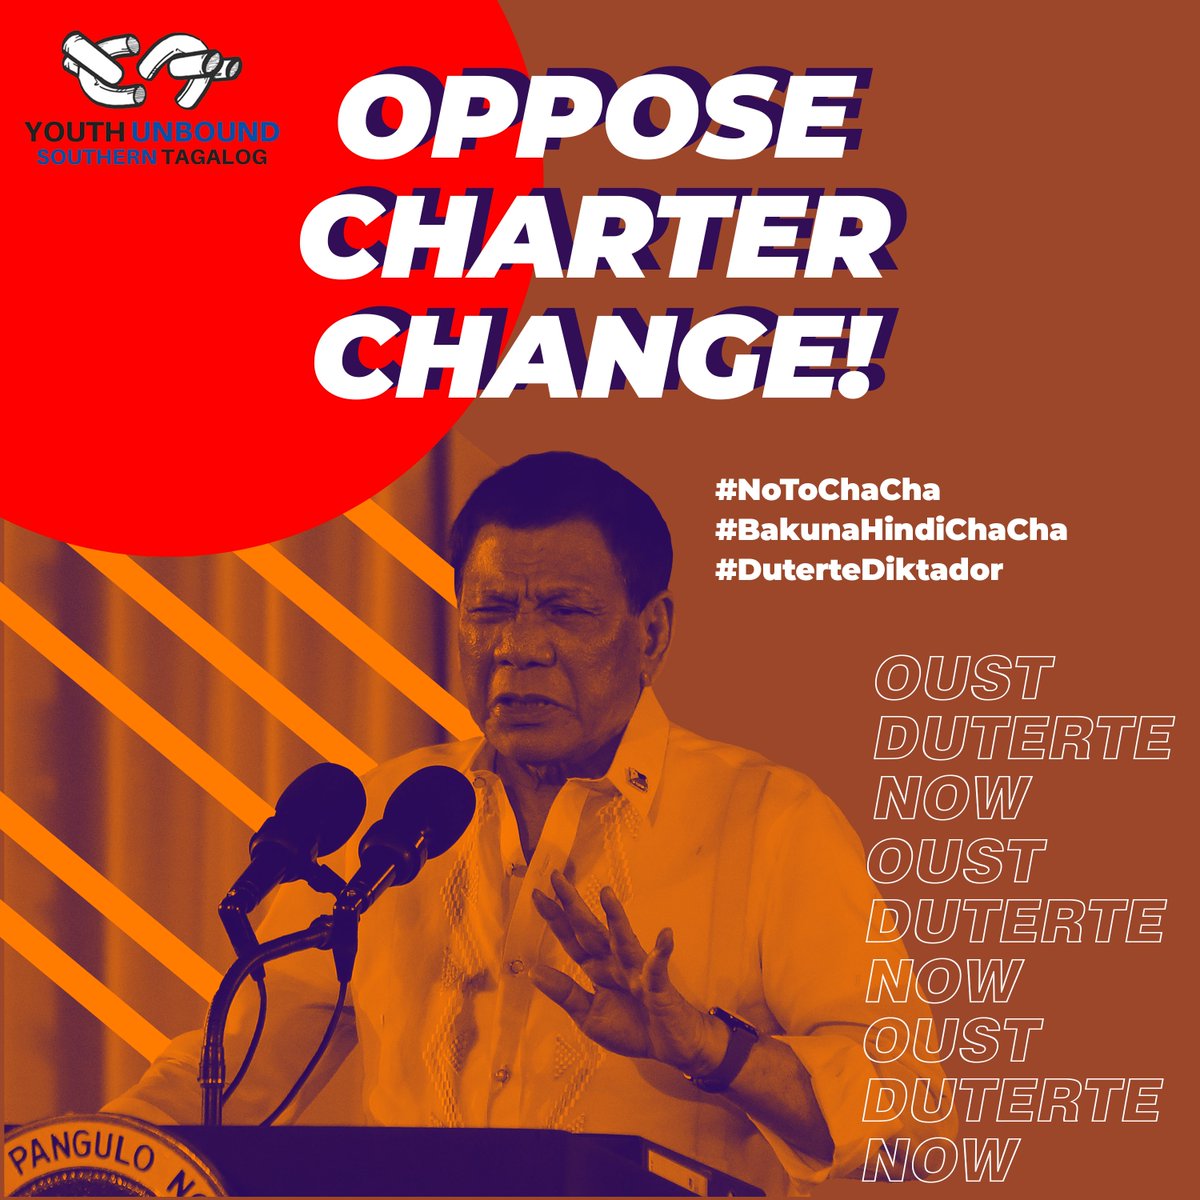 The Youth UNBOUND-Southern Tagalog strongly opposes the planned Cha-cha of the fascist regime, and condemns the opportunist dictatorship tactics of Duterte. (1/n)

Read full statement here: facebook.com/YouthUNBOUNDSo…

#NoToChaCha
#BakunaHindiChaCha
#DuterteDiktador
#OUSTDUTERTENOW